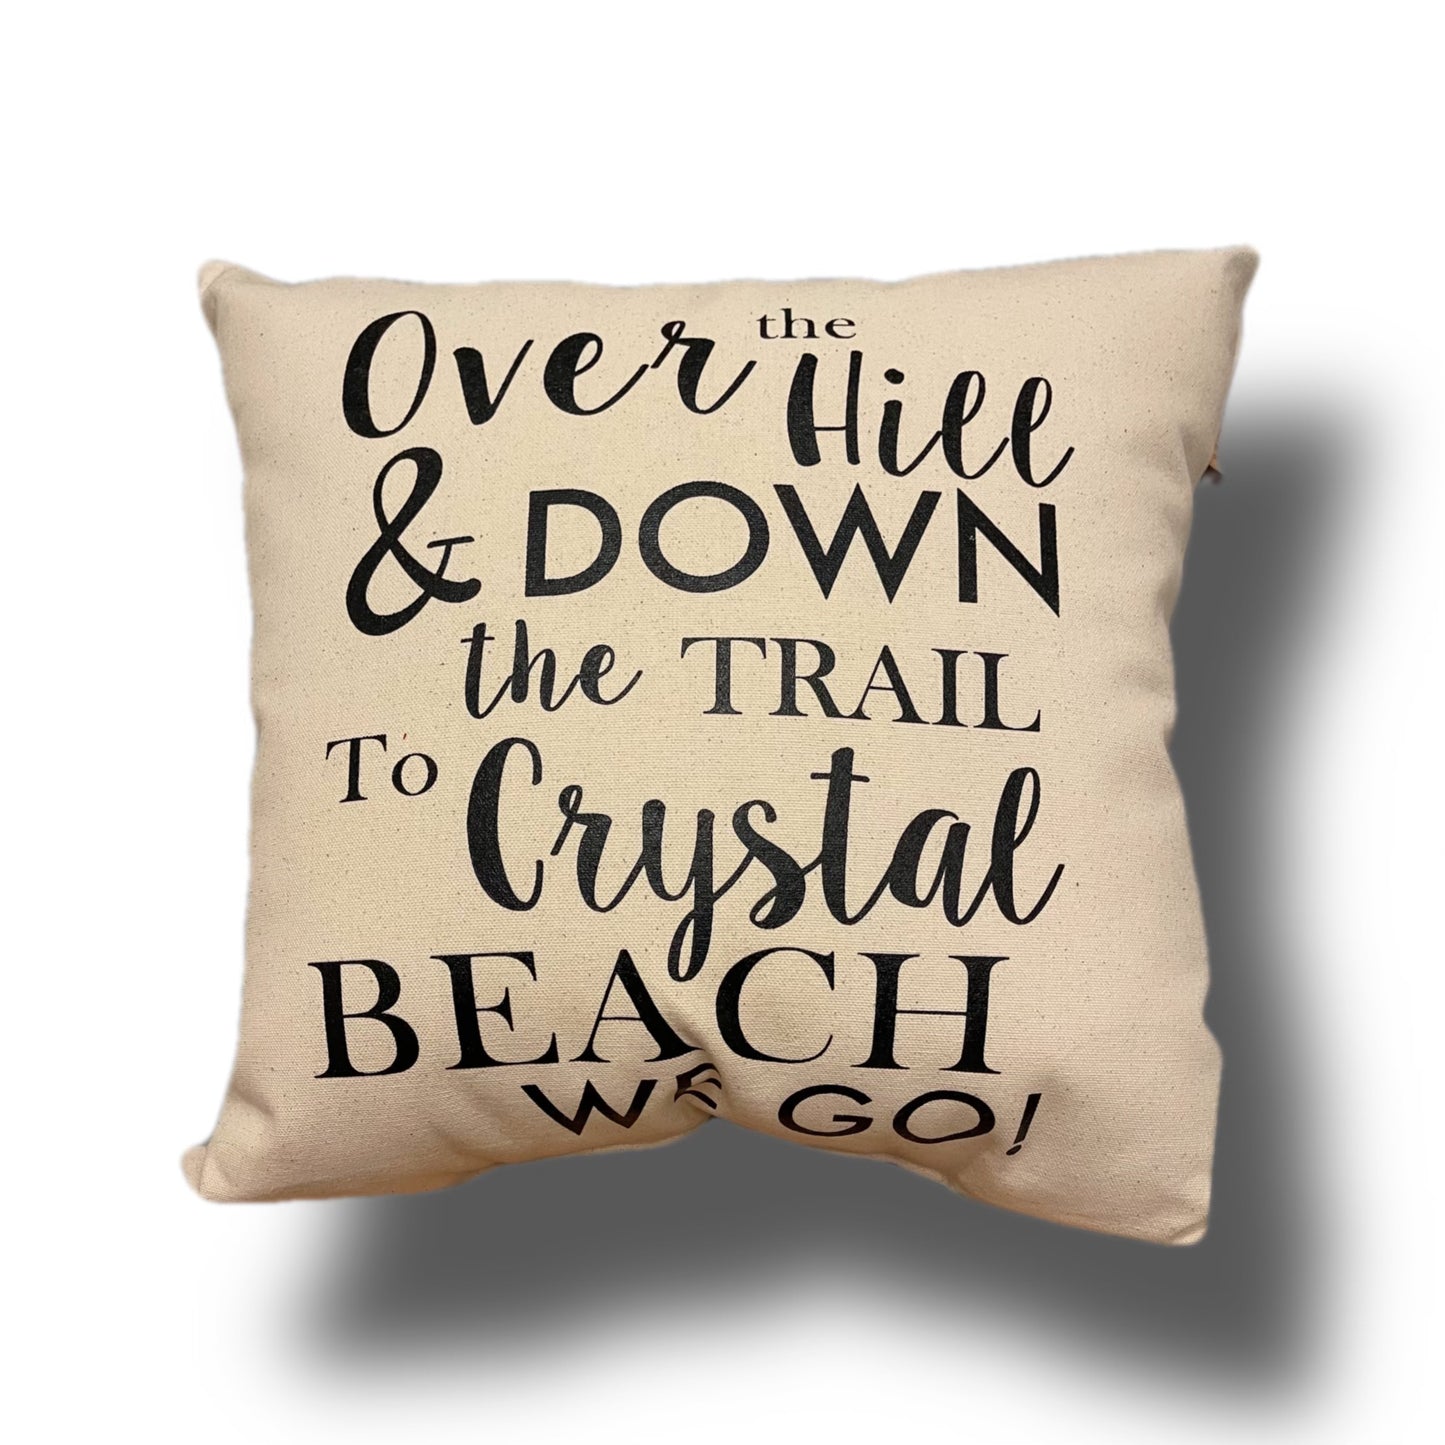 Over the Hill & Down the Trail Crystal Beach Pillow